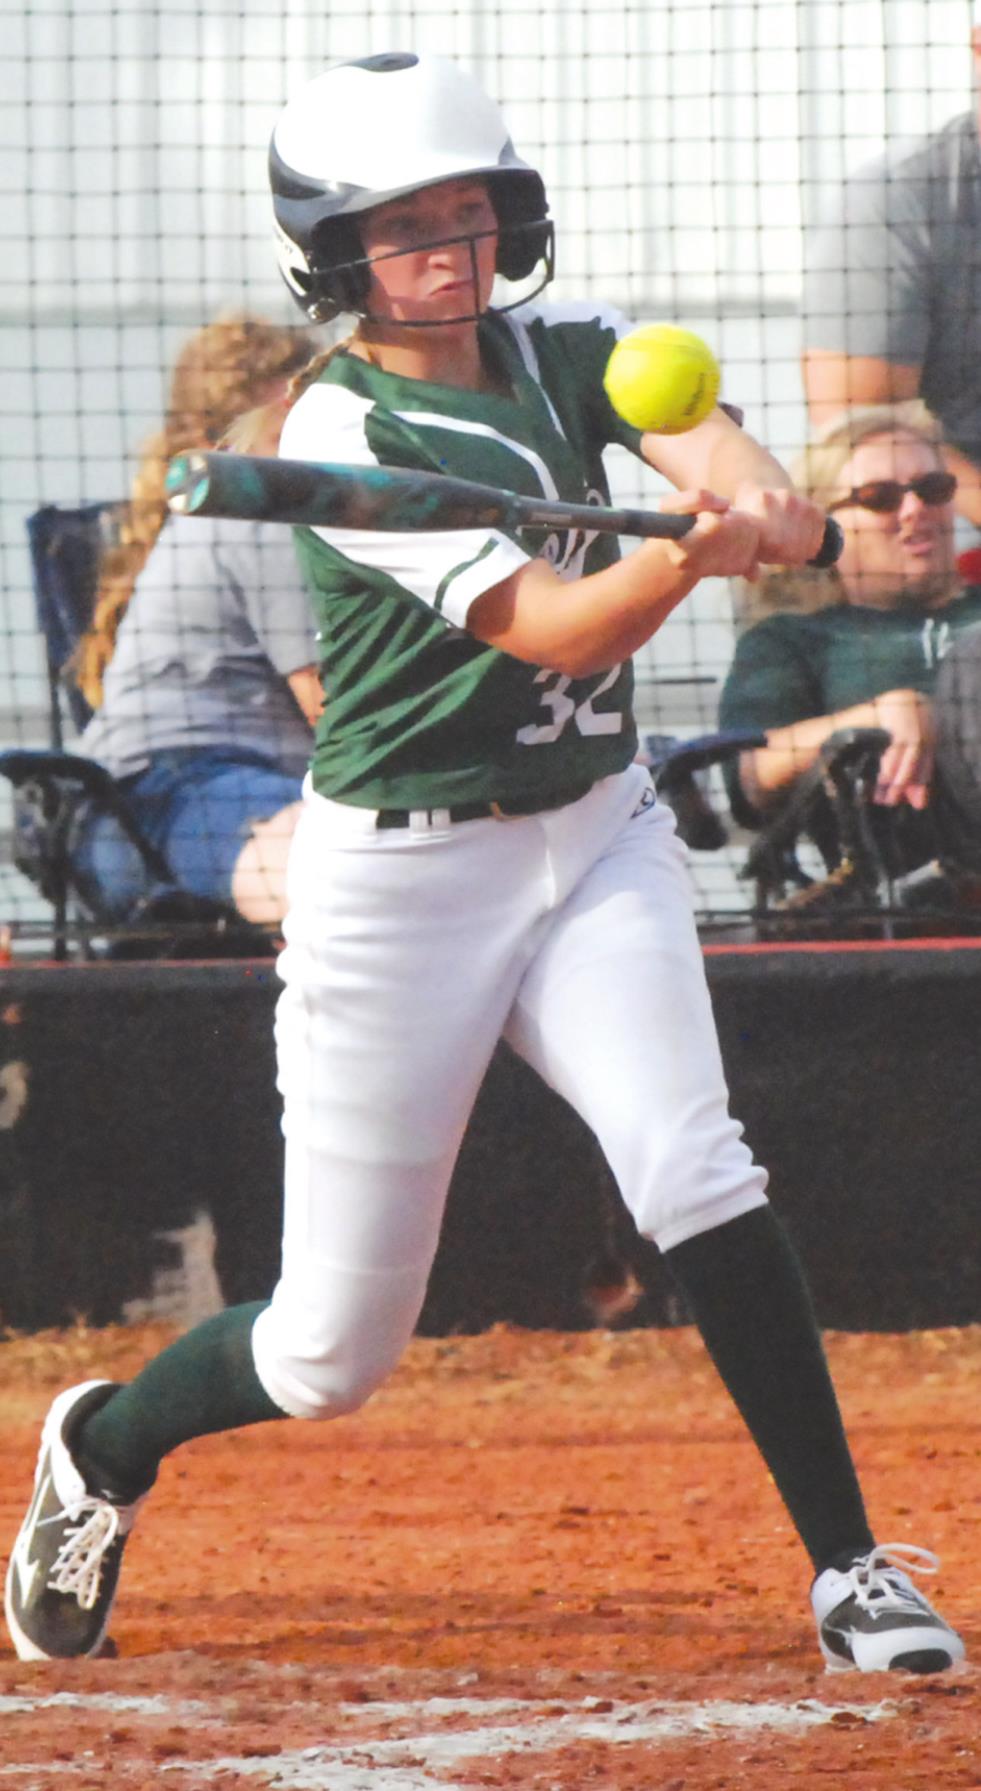 Kaylee Yoder went 3-7with 2 runs scored, 2 RBIs and a walk in this weekend’s tournament at Fairview. Aubyn Phippen/WDN